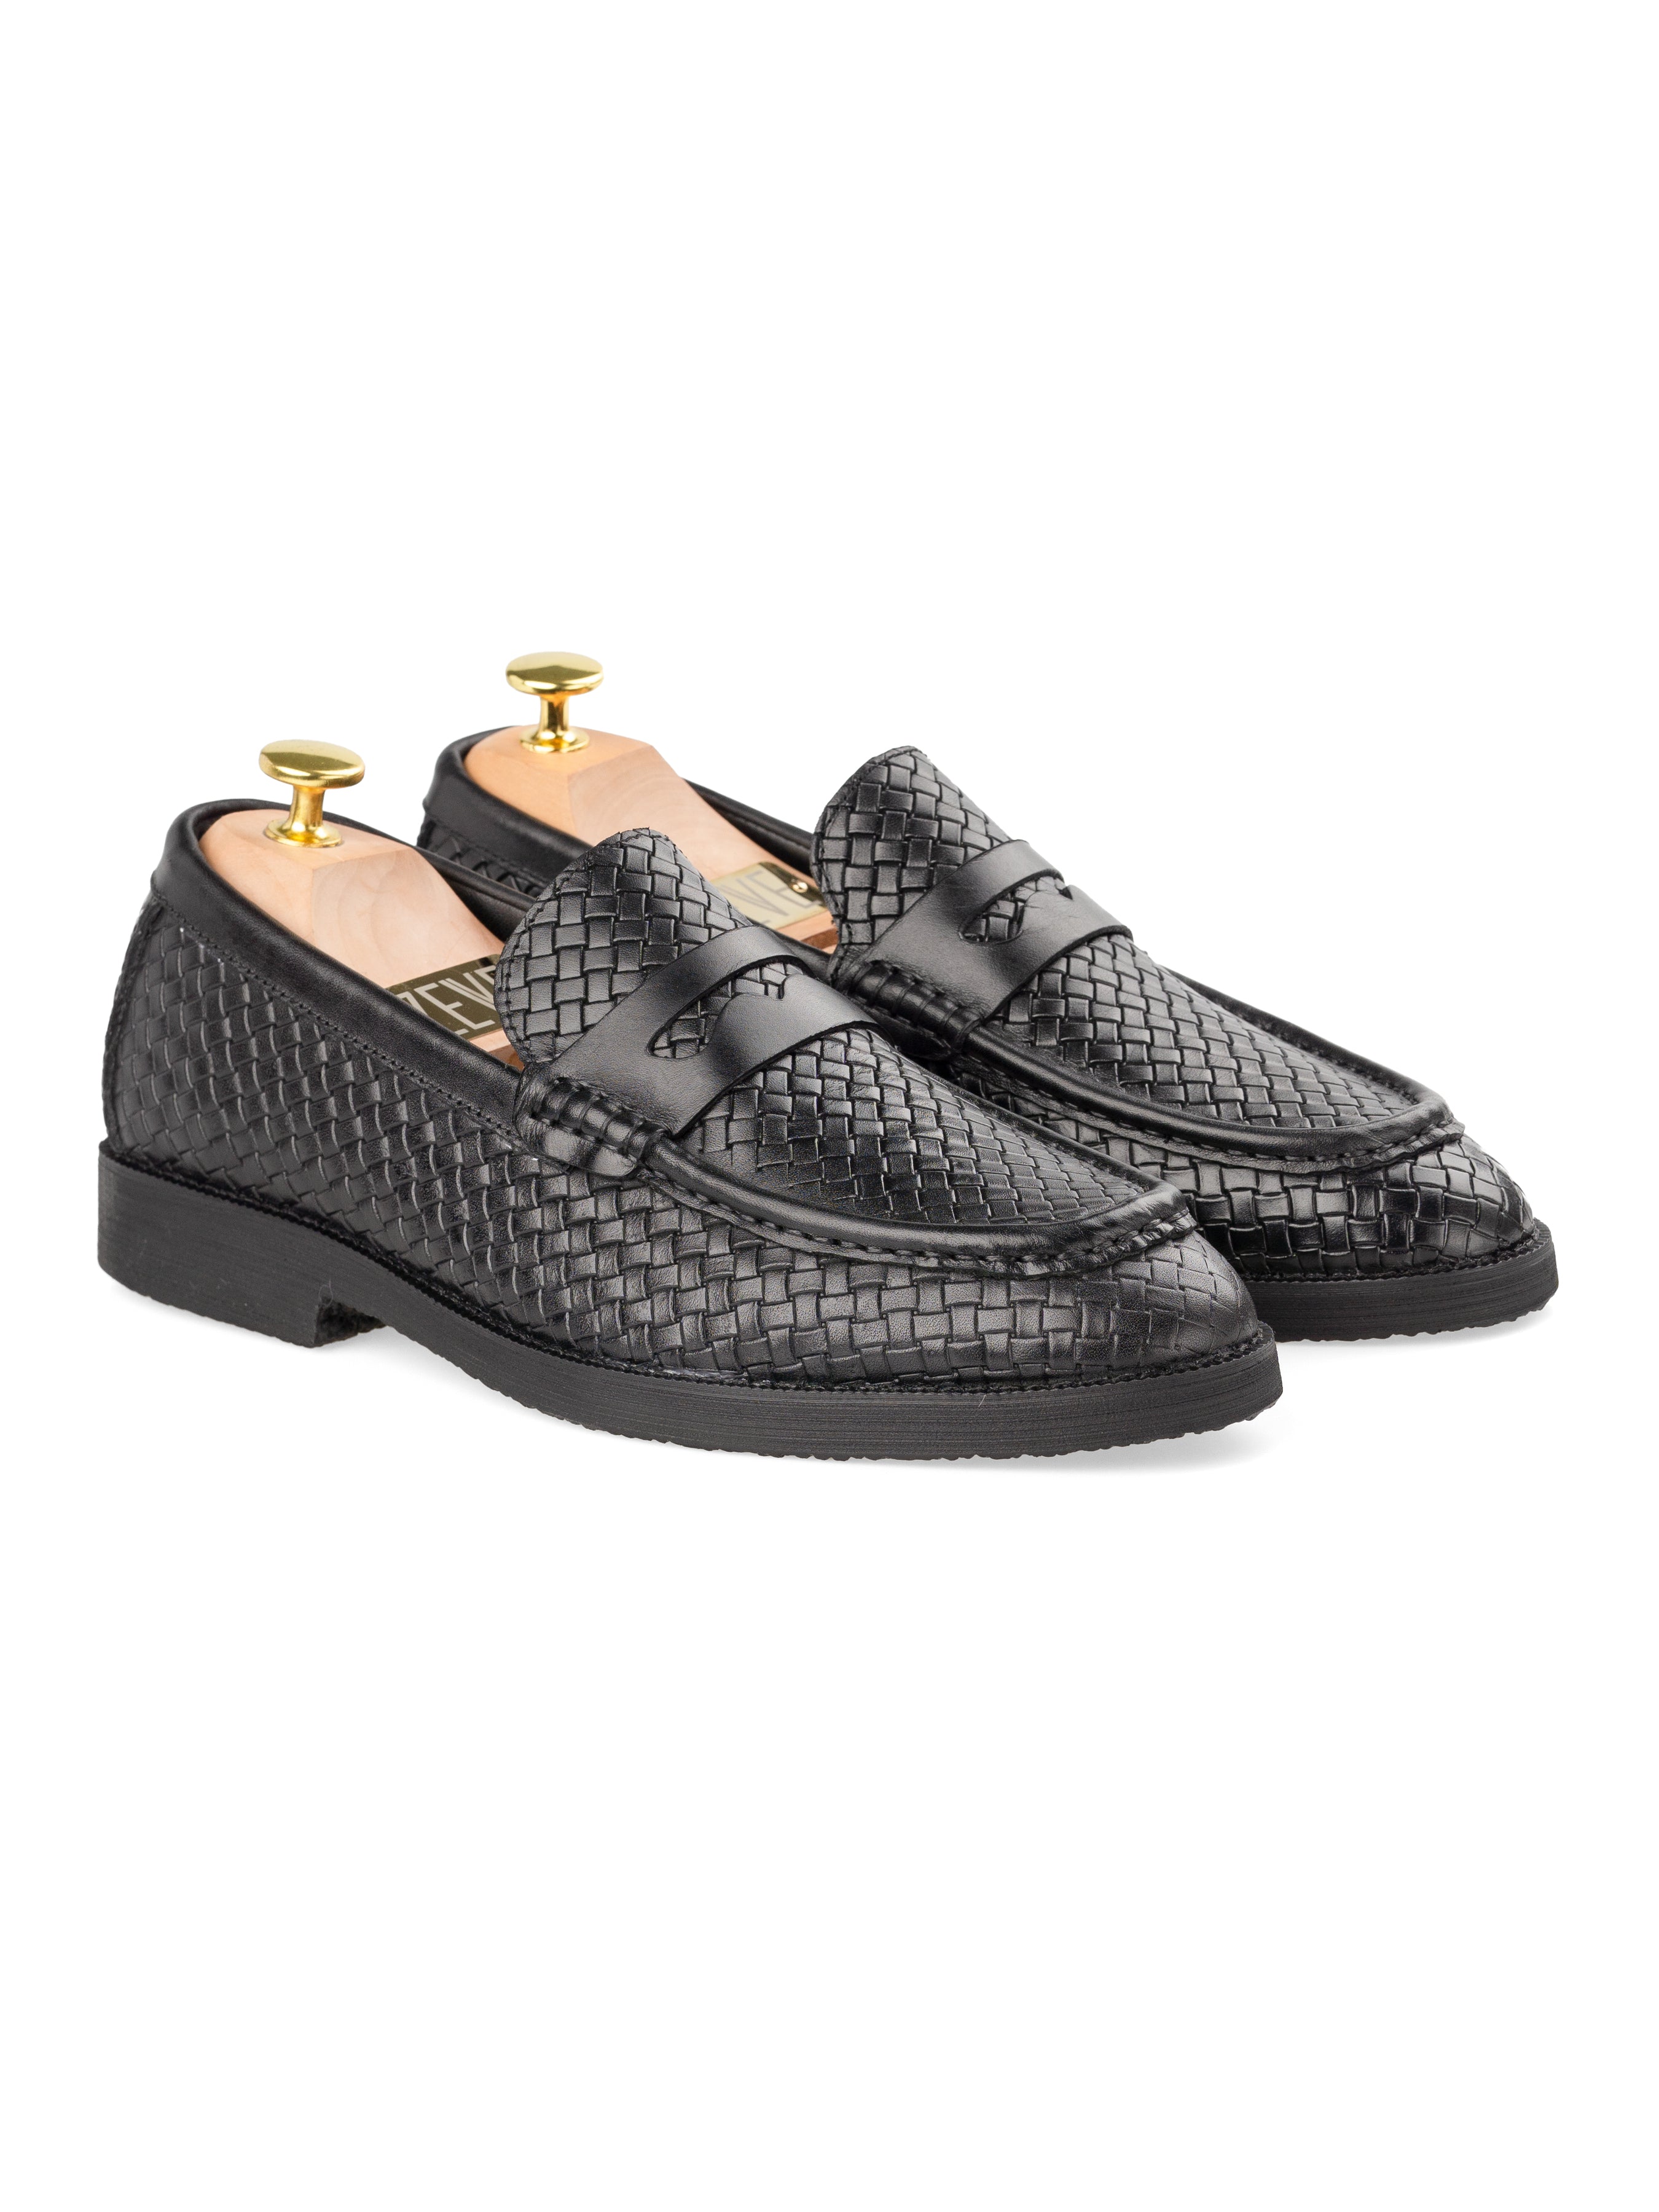 Penny Moccasin Loafer - Black Woven Leather (Crepe Sole)